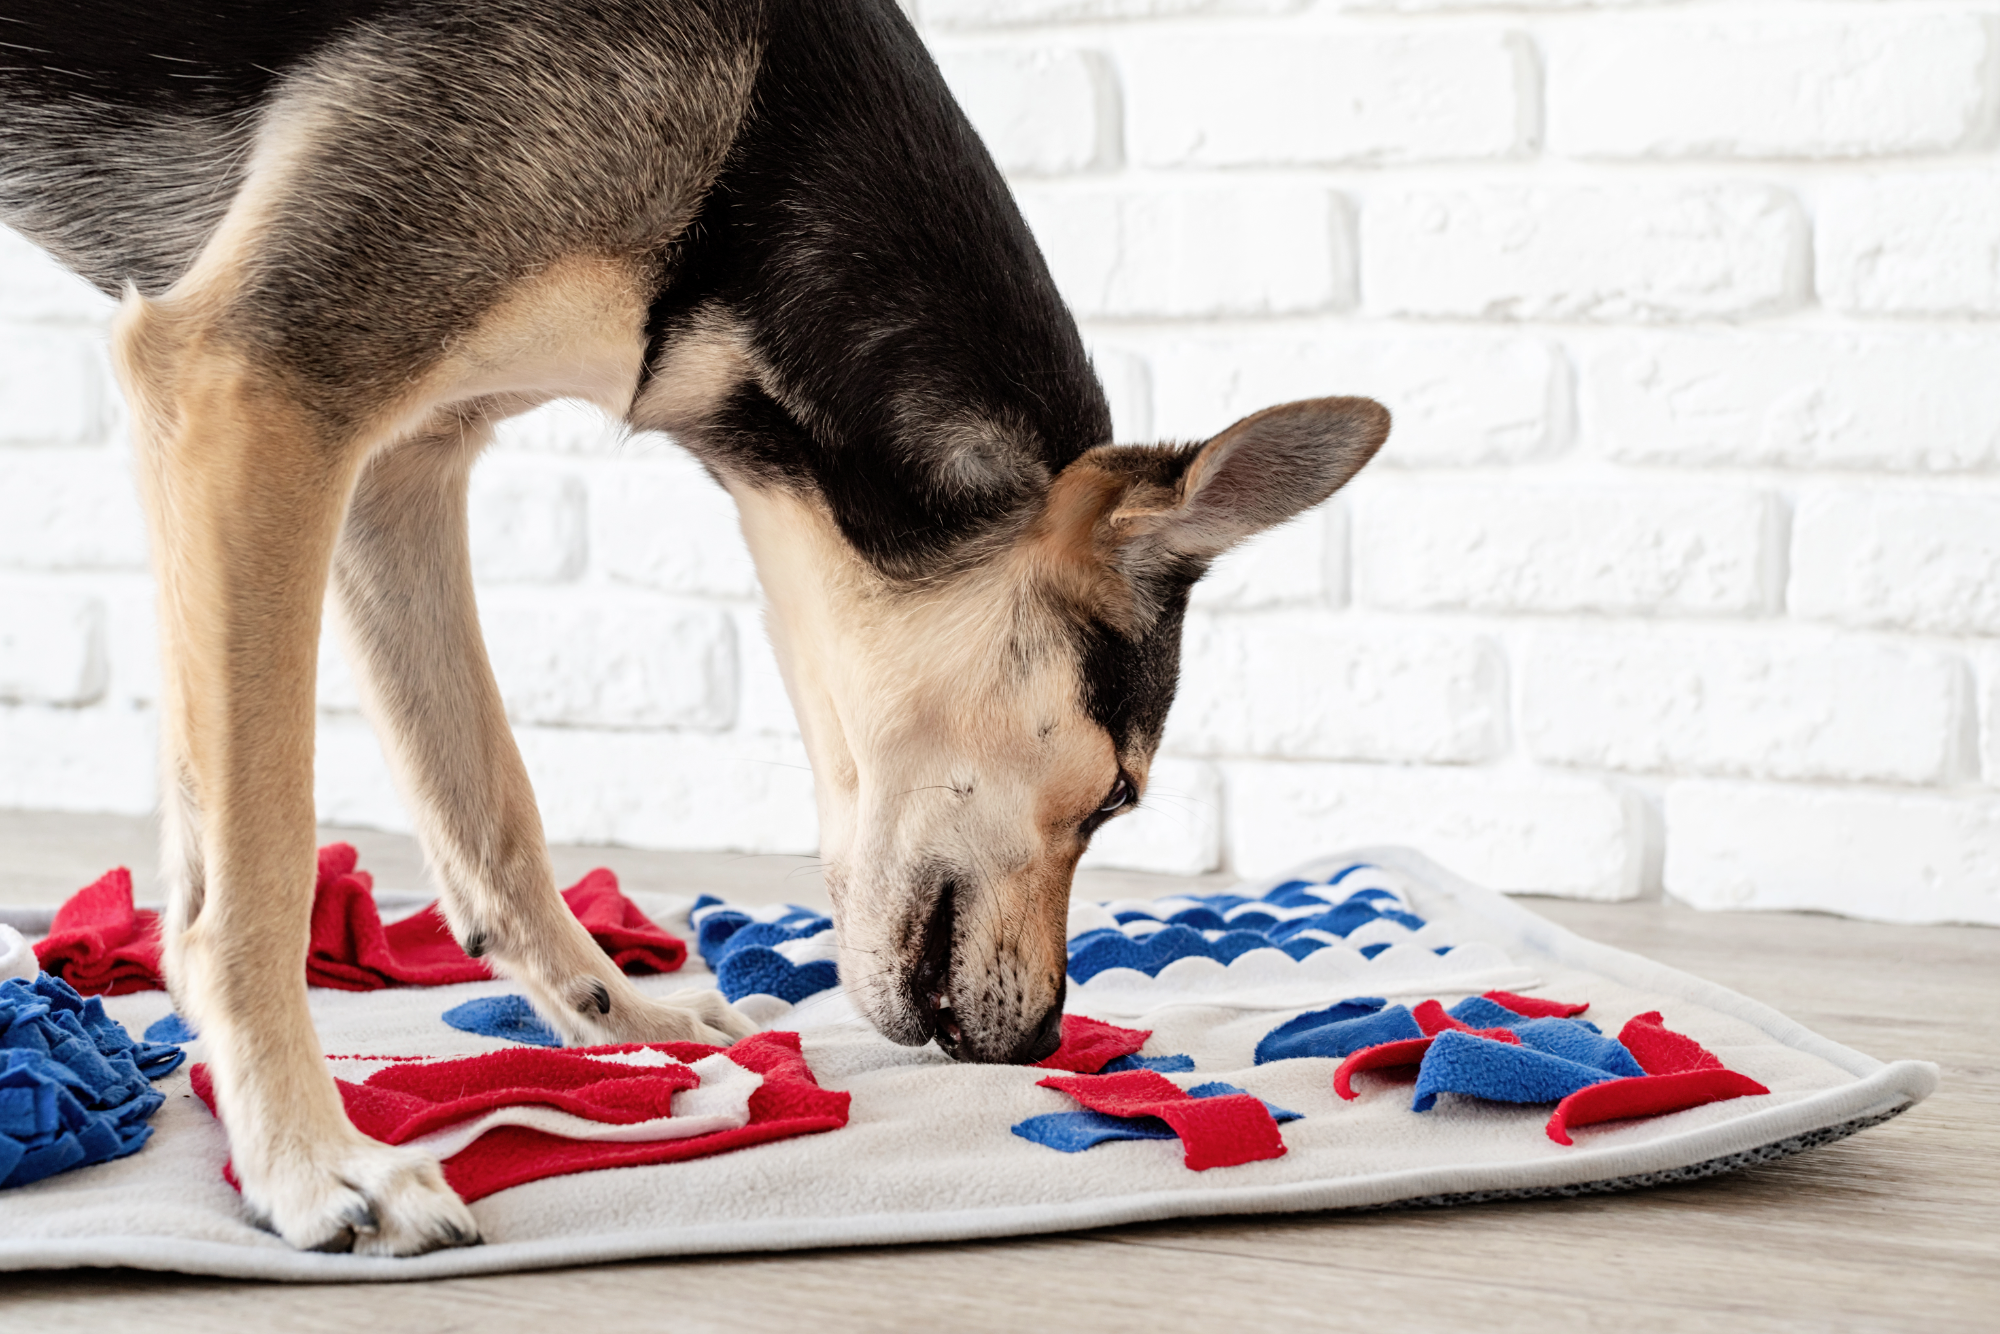 Pawsitively Engaged: 5 Creative Ways to Mentally Stimulate Your Dog